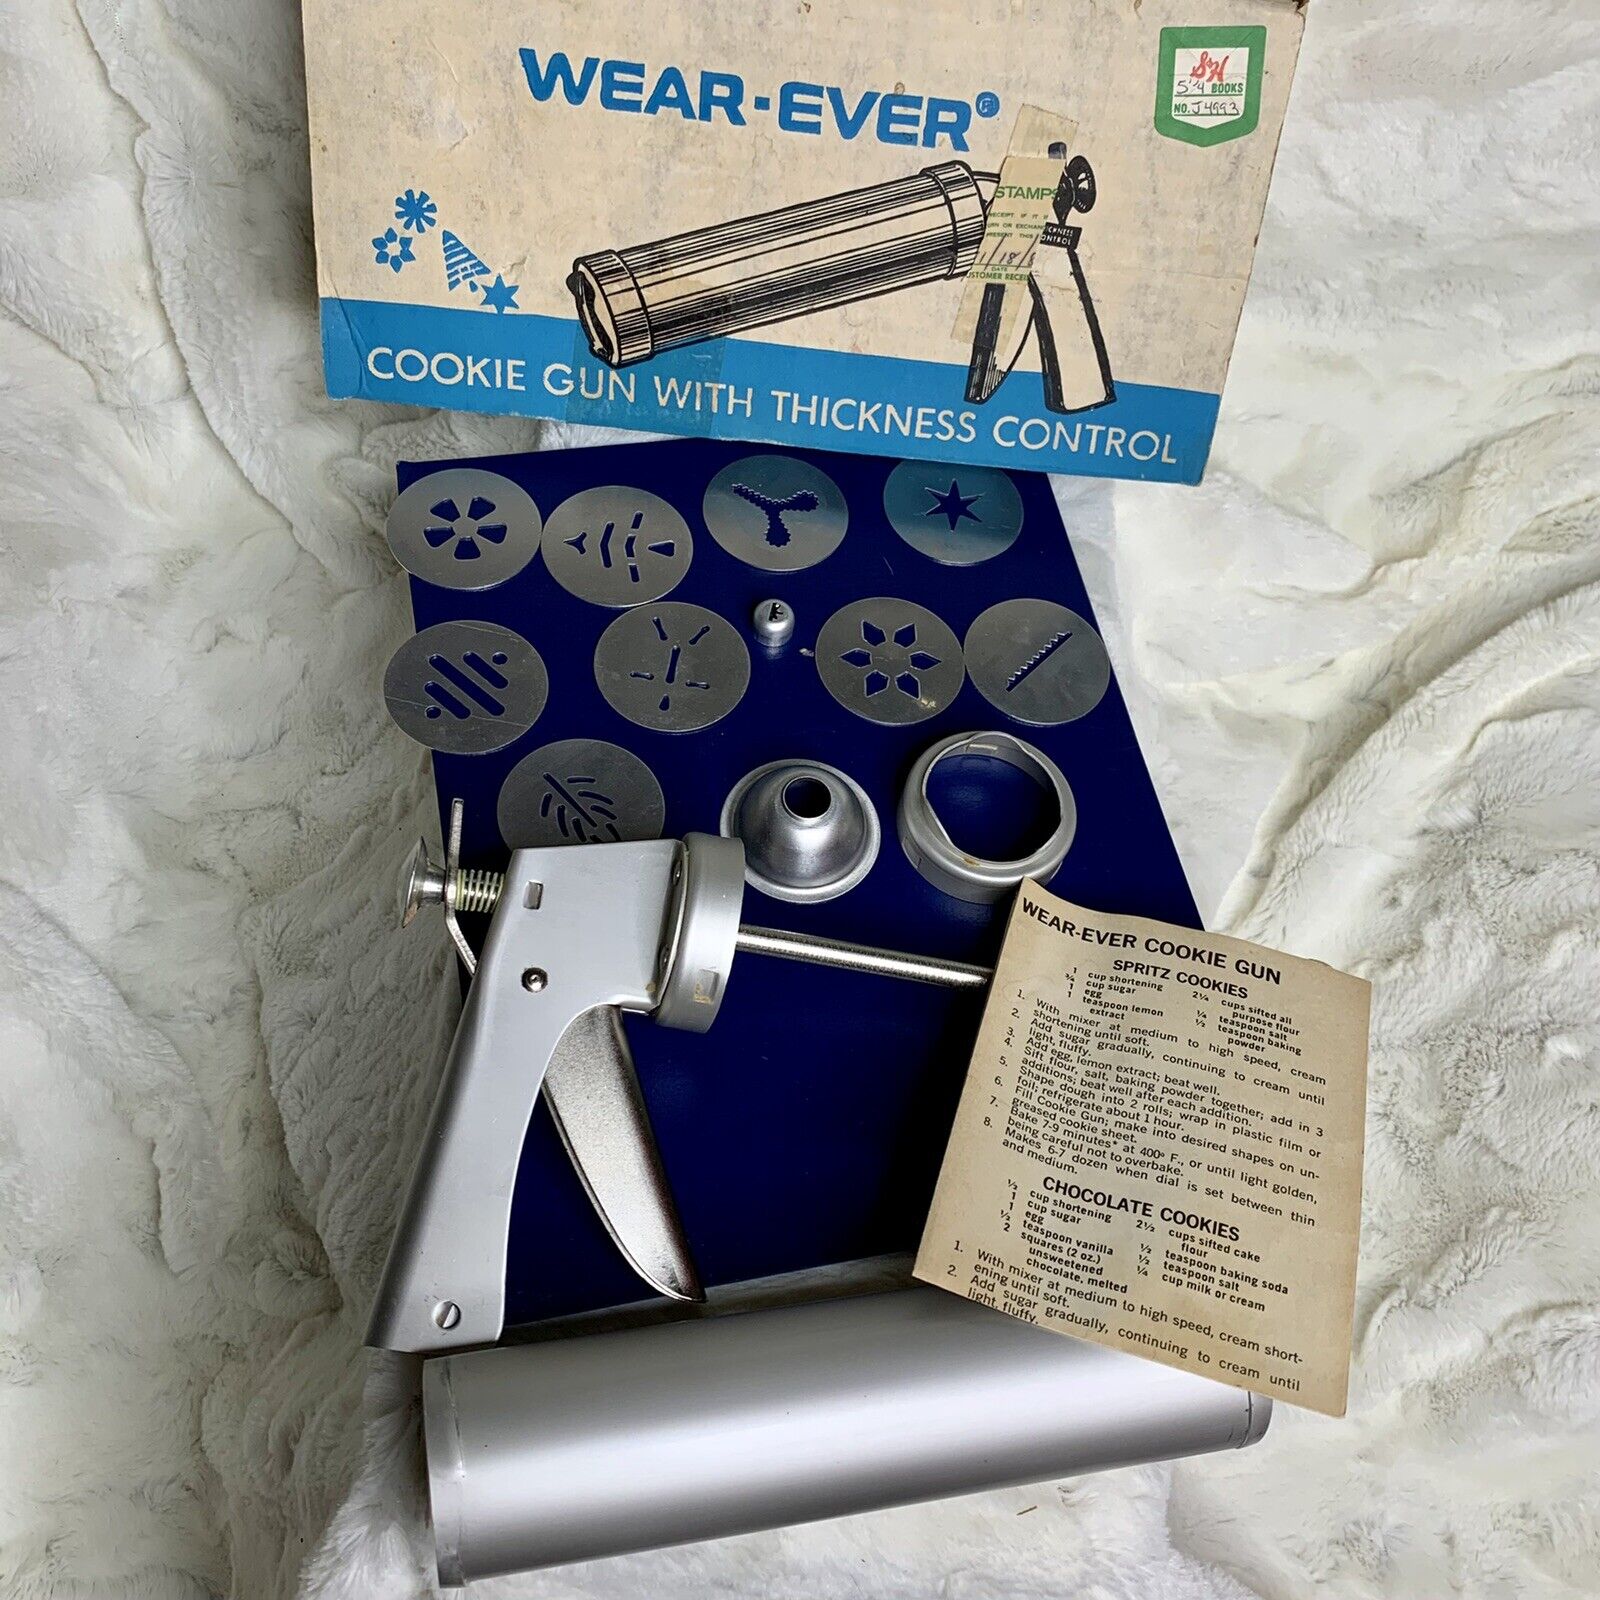 VINTAGE Wear-Ever Cookie Gun & Pastry Decorator USA 1980's S&H Stamps INCOMPLETE